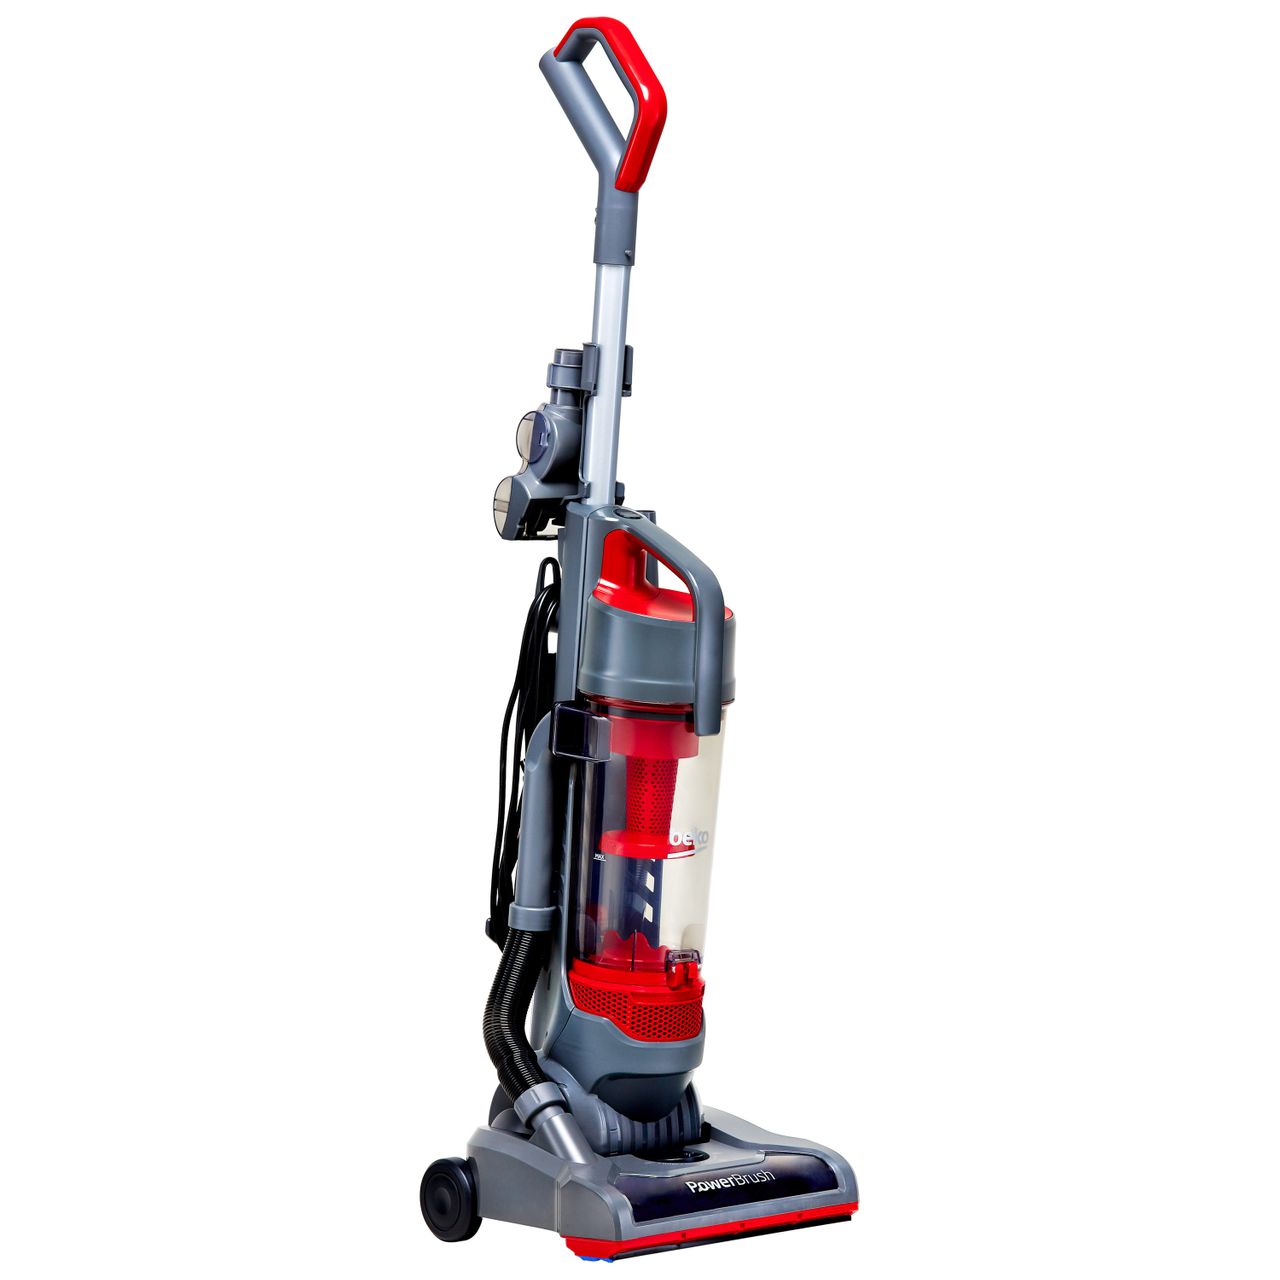 Beko Delux with Turbo Brush VCS5125AR Upright Vacuum Cleaner Review